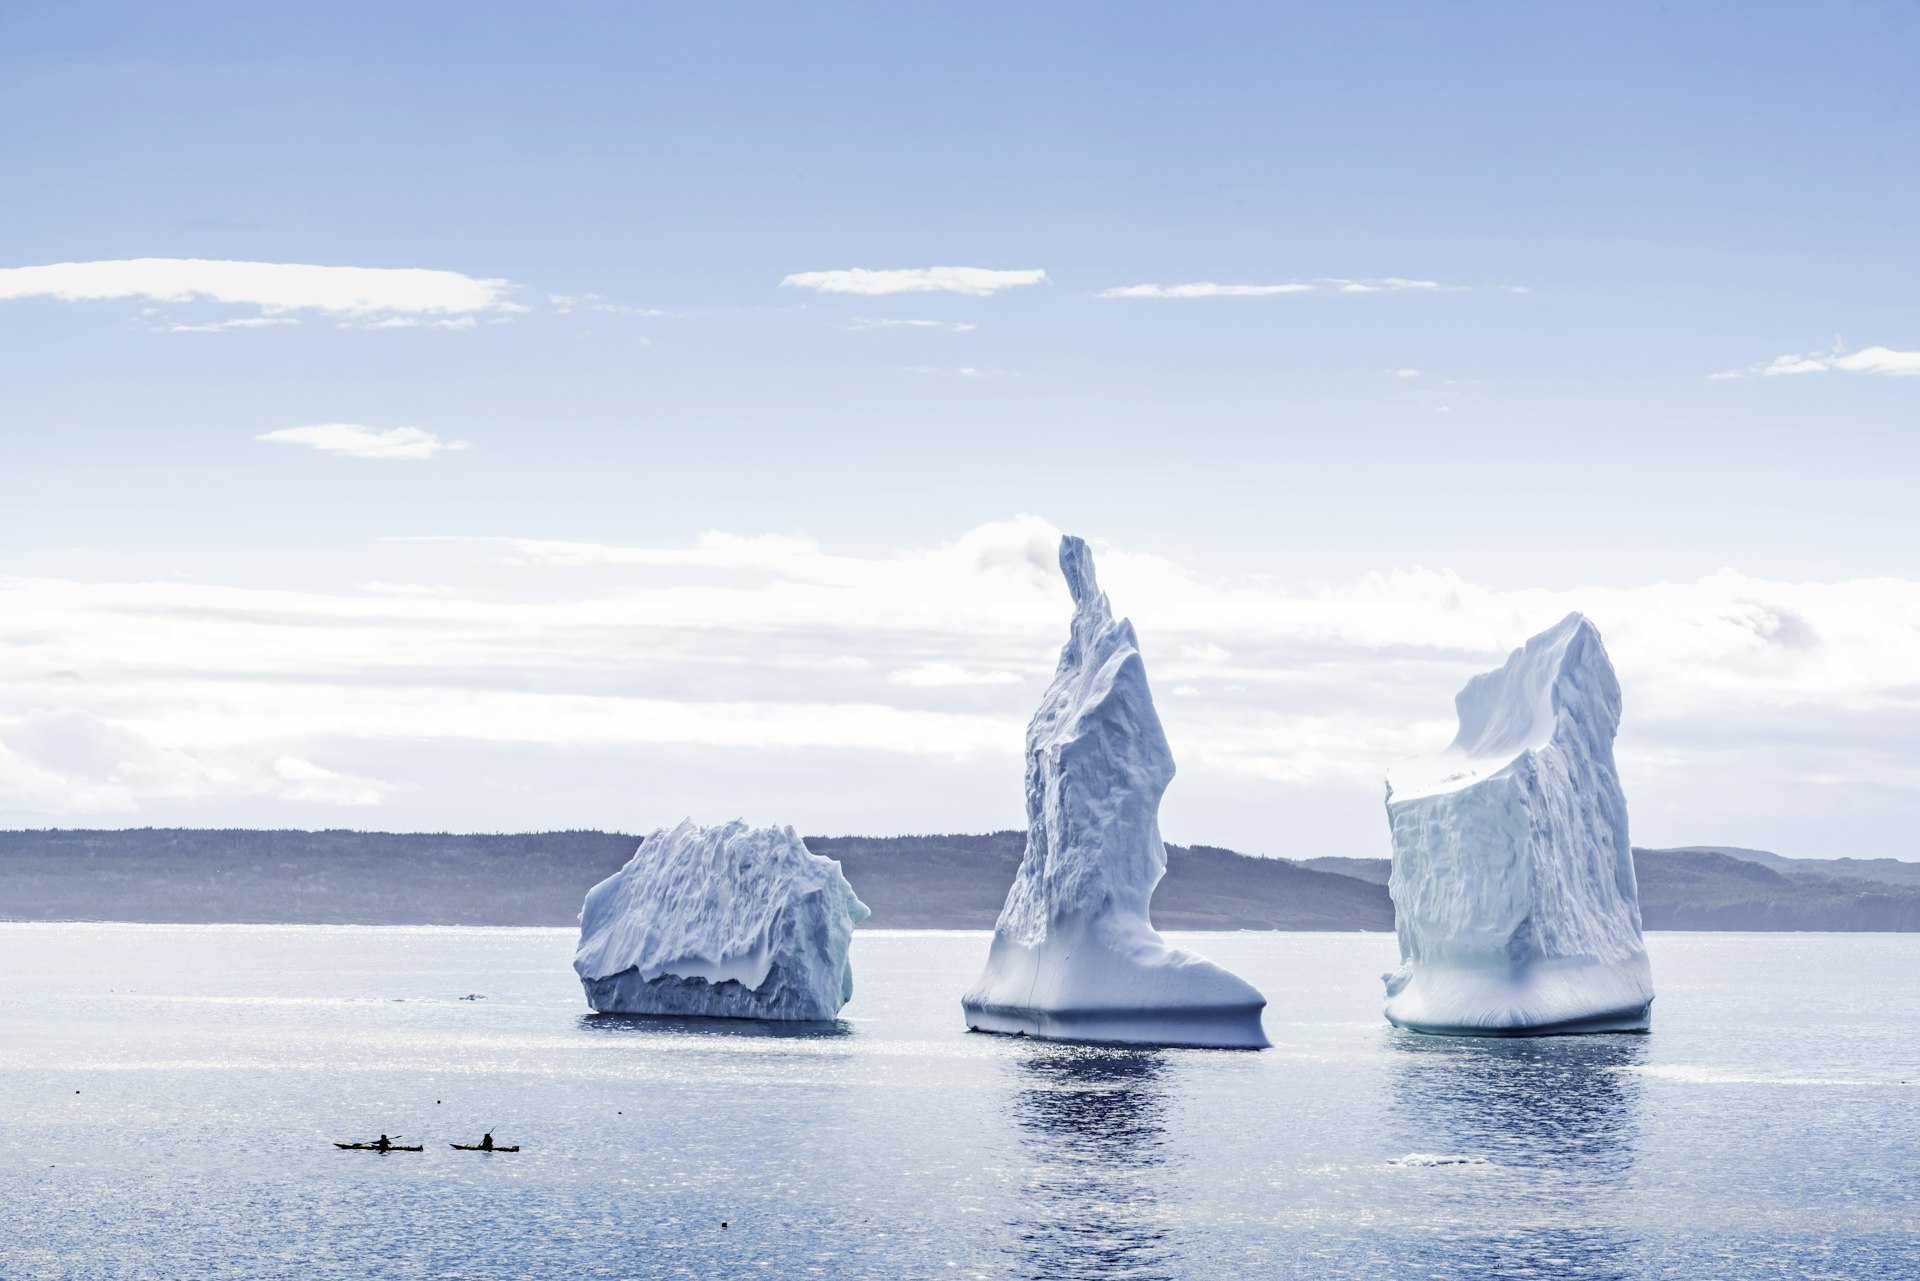 Two kayakers paddle past icebergs in the Wolf Cove of Bonavista, Newfoundland, Canada